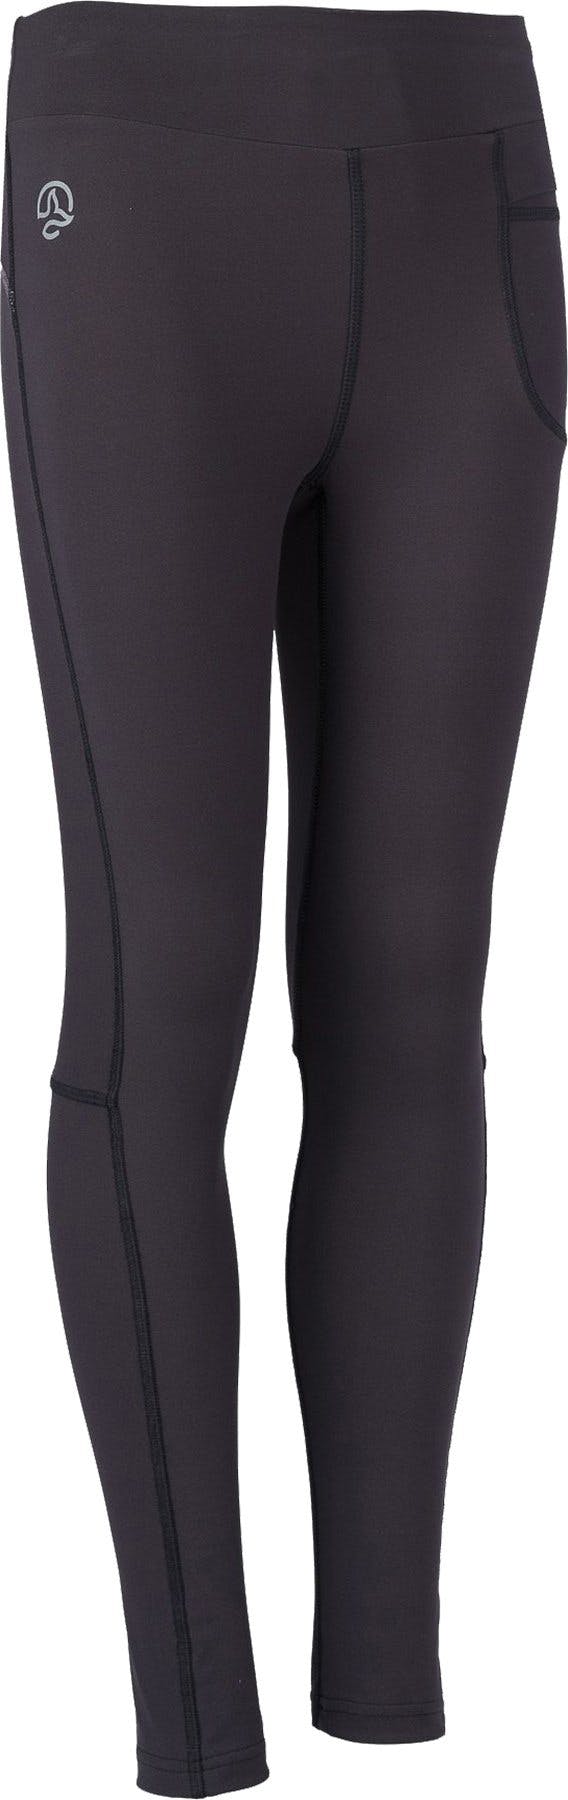 Product image for Coolshy Tights - Youth